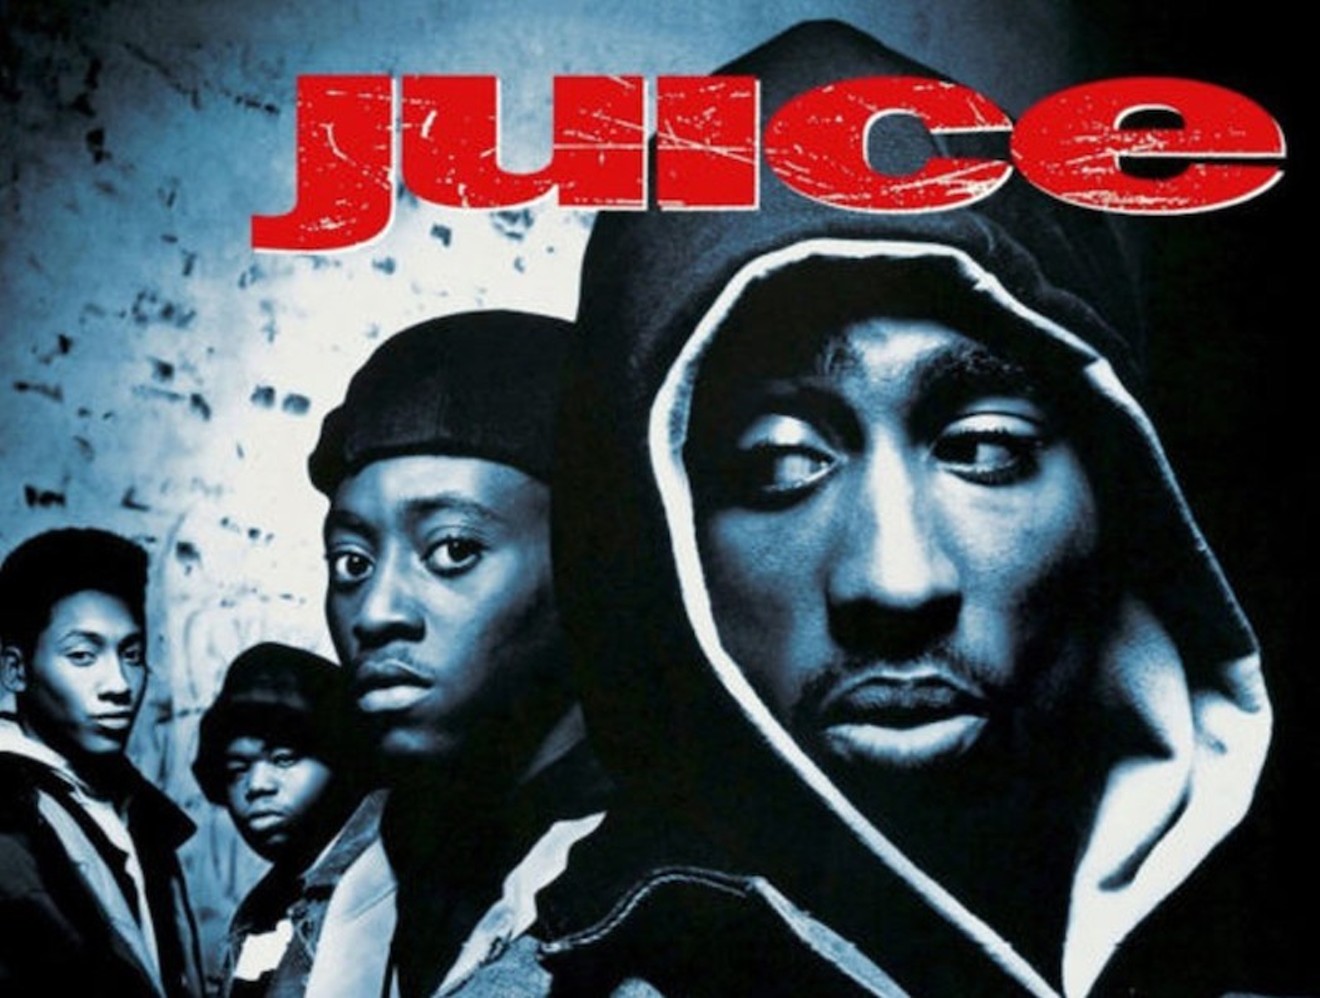 Juice turned 25 this year and still has one hanging question about the film, why that ending?